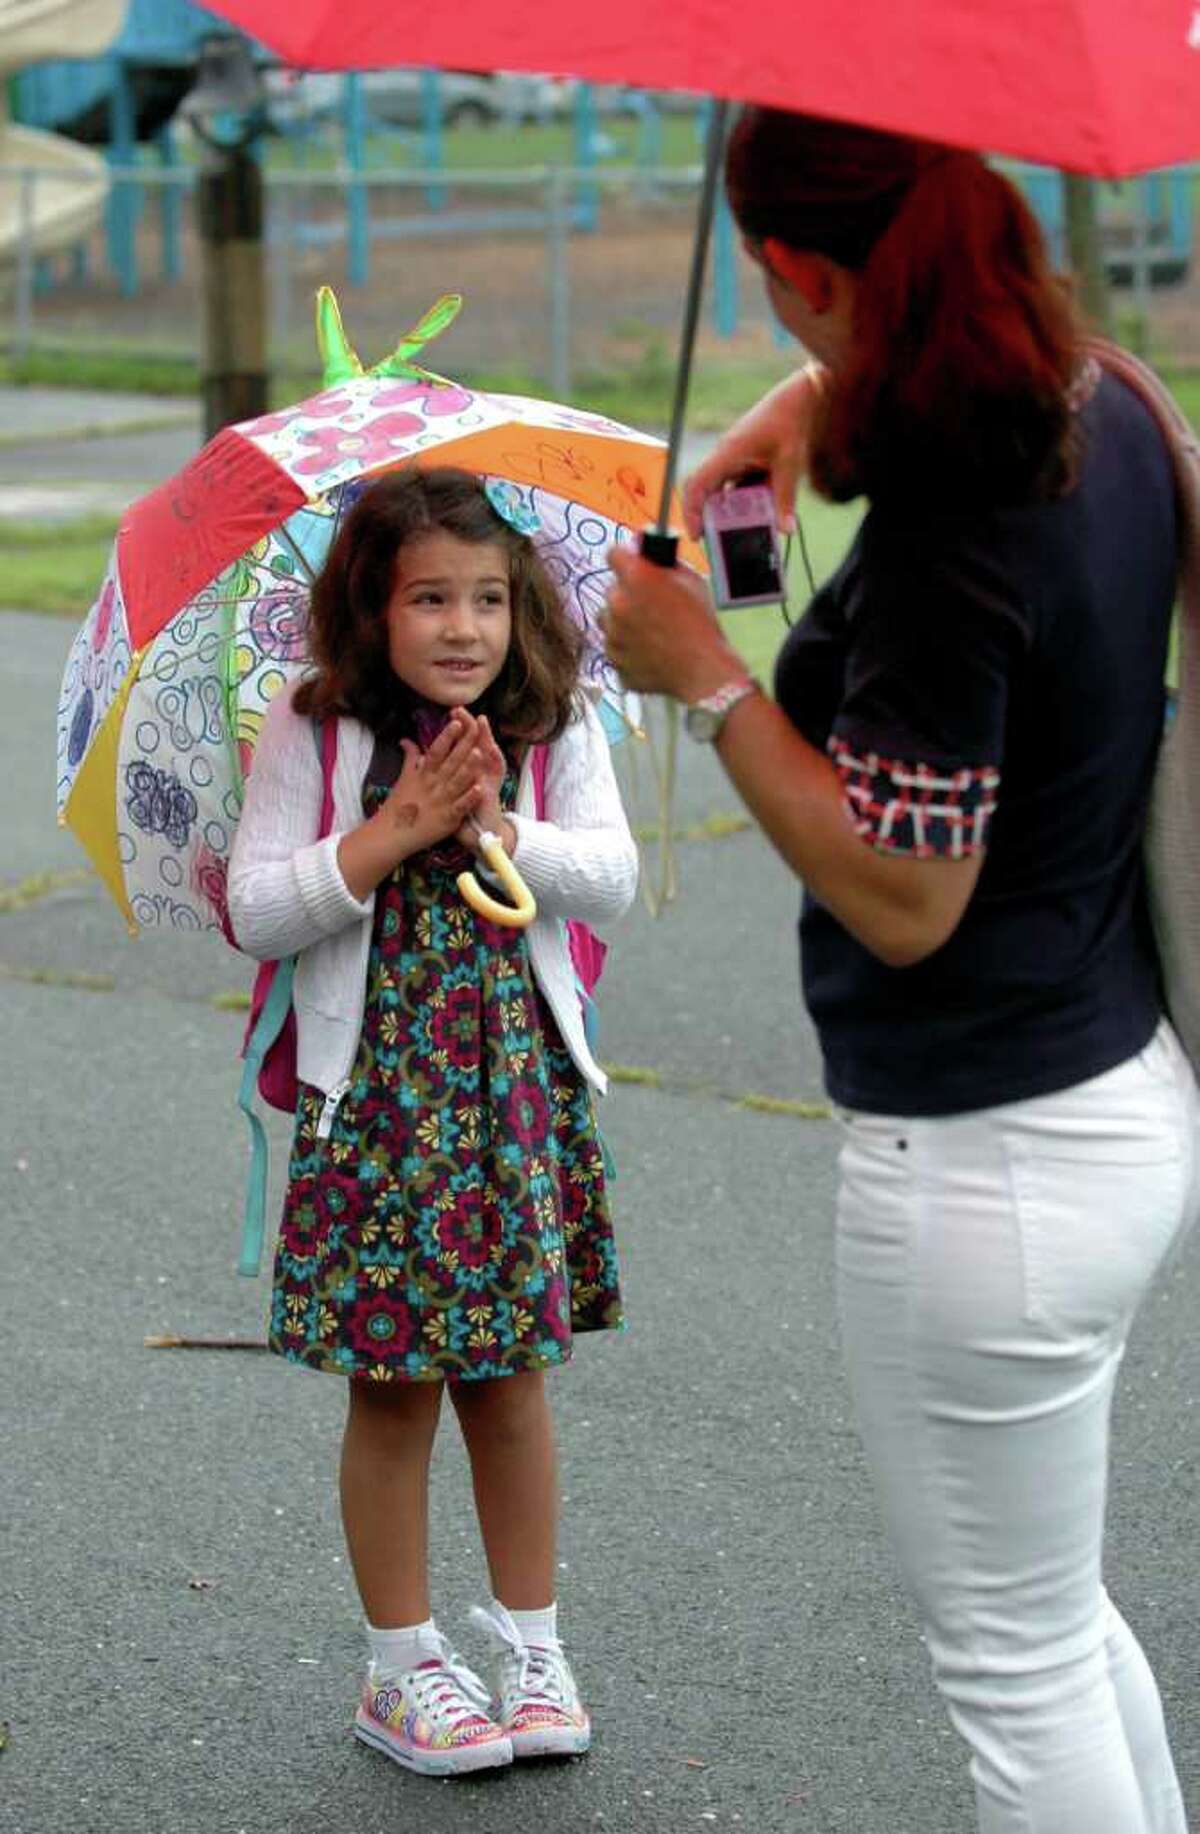 Keri O'Neill takes a photo of her daughter, Grace O'Neill outside Roger Sherman School on the first day of classes in Fairfield, Conn. on Tuesday Sept. 6, 2011.